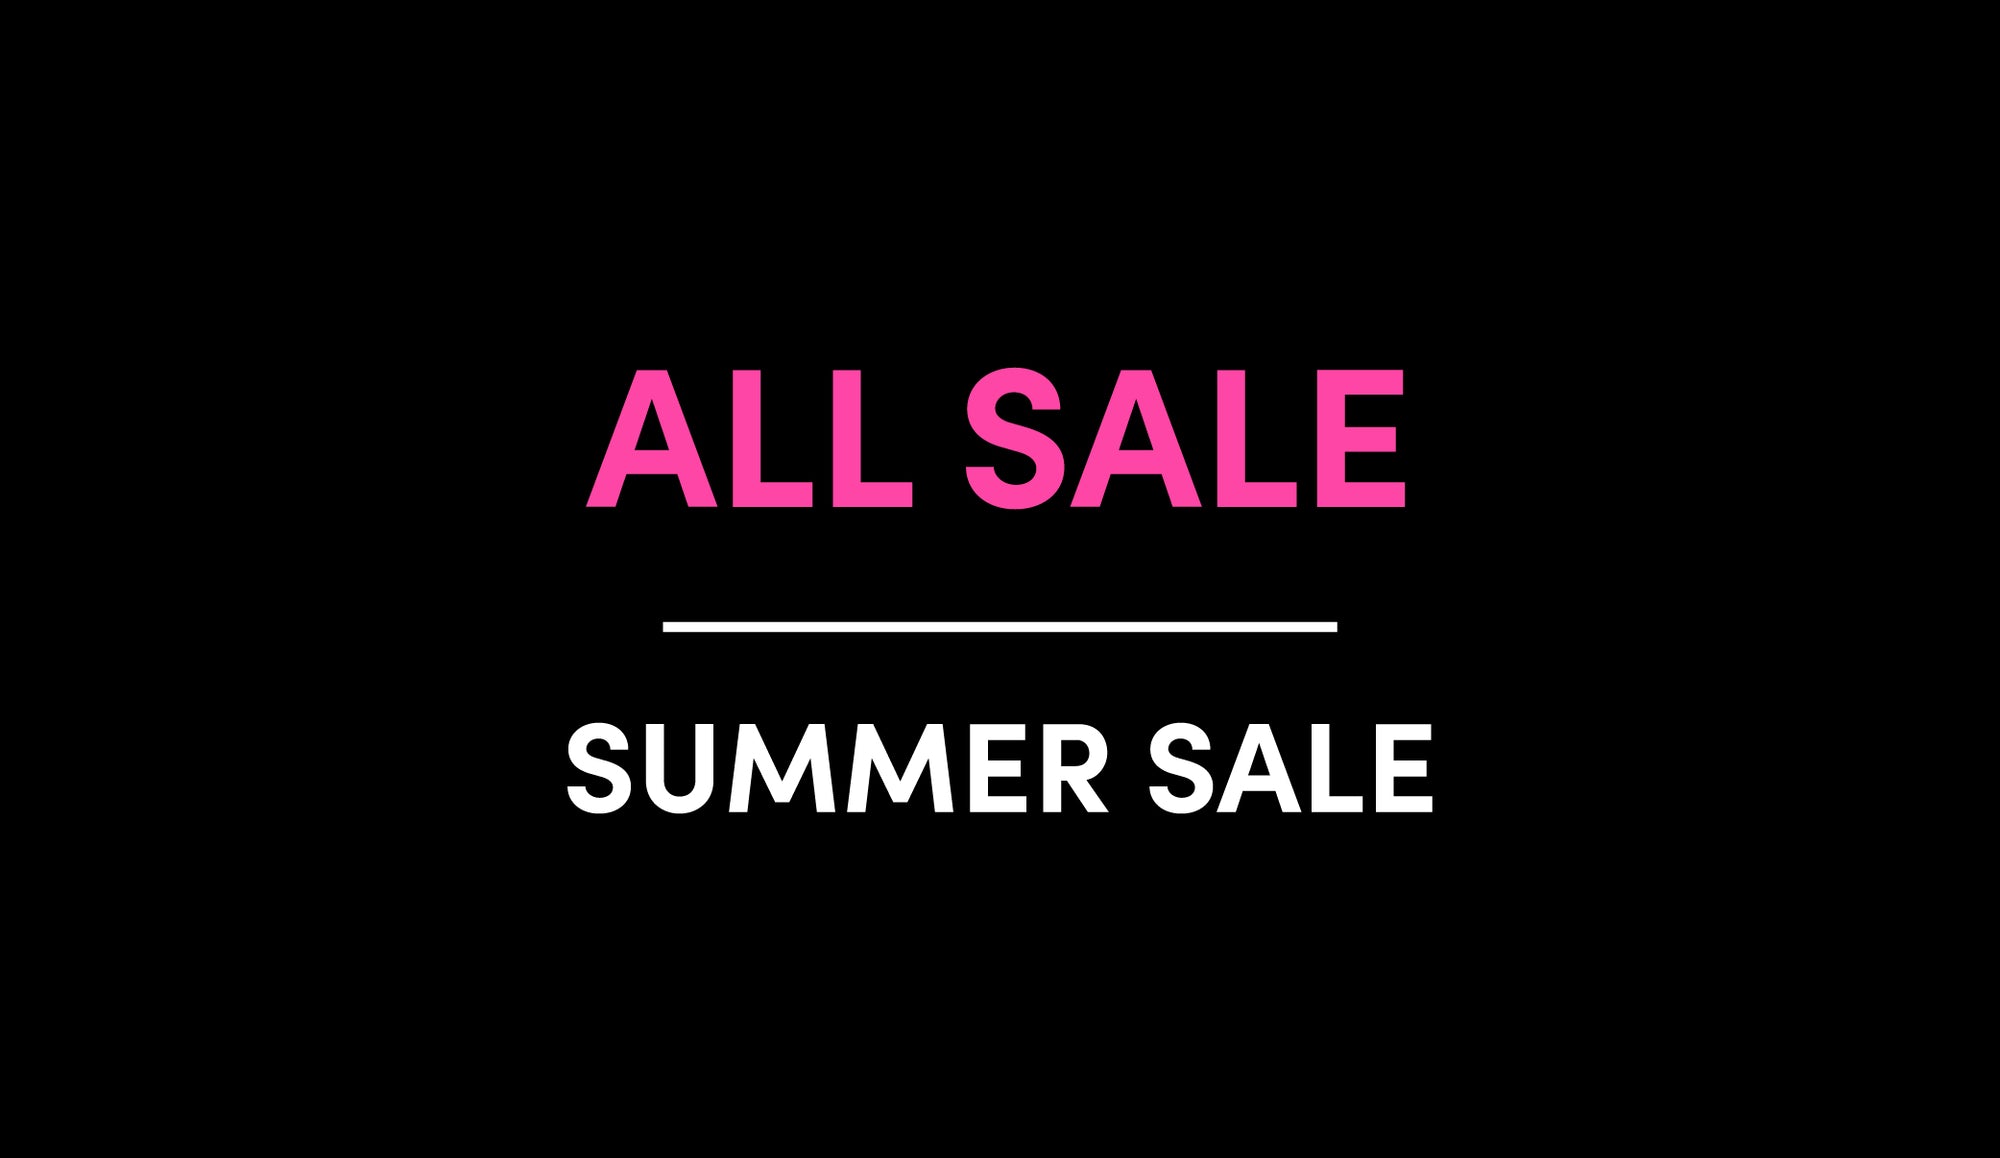 All Sale Summer Sale